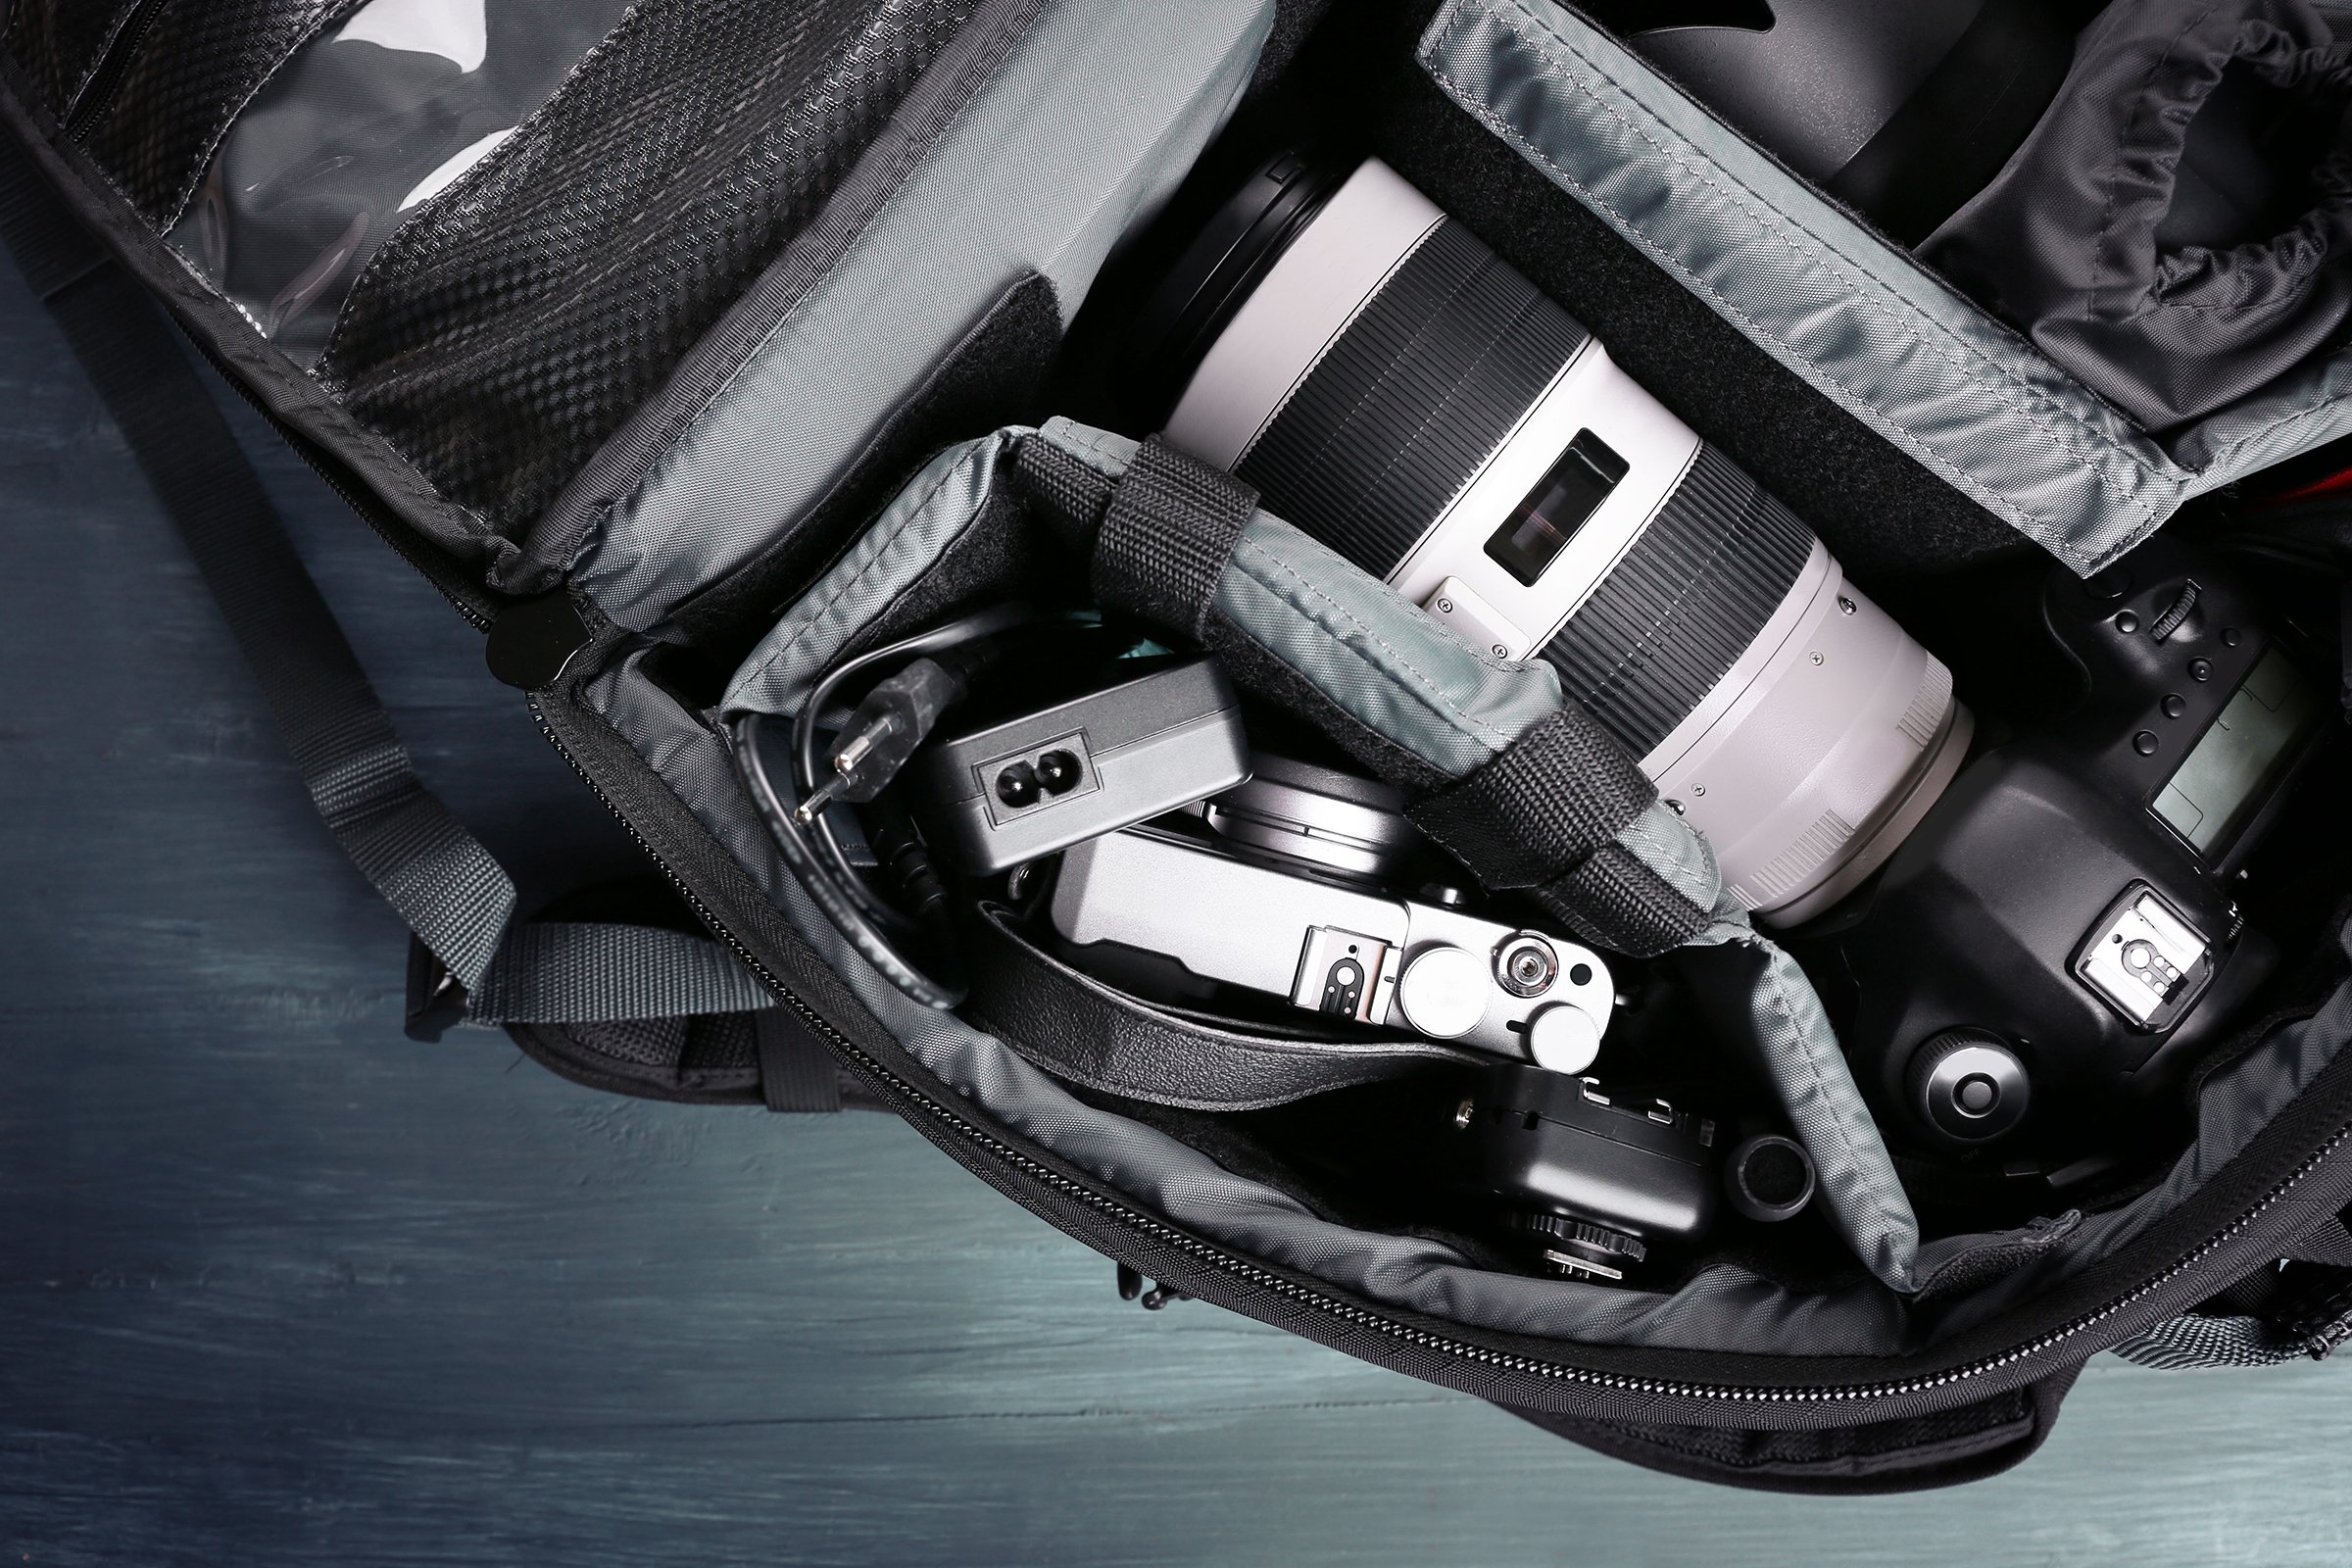 The Top 5 Best Travel Cases for Camera Gear | Skylum Blog